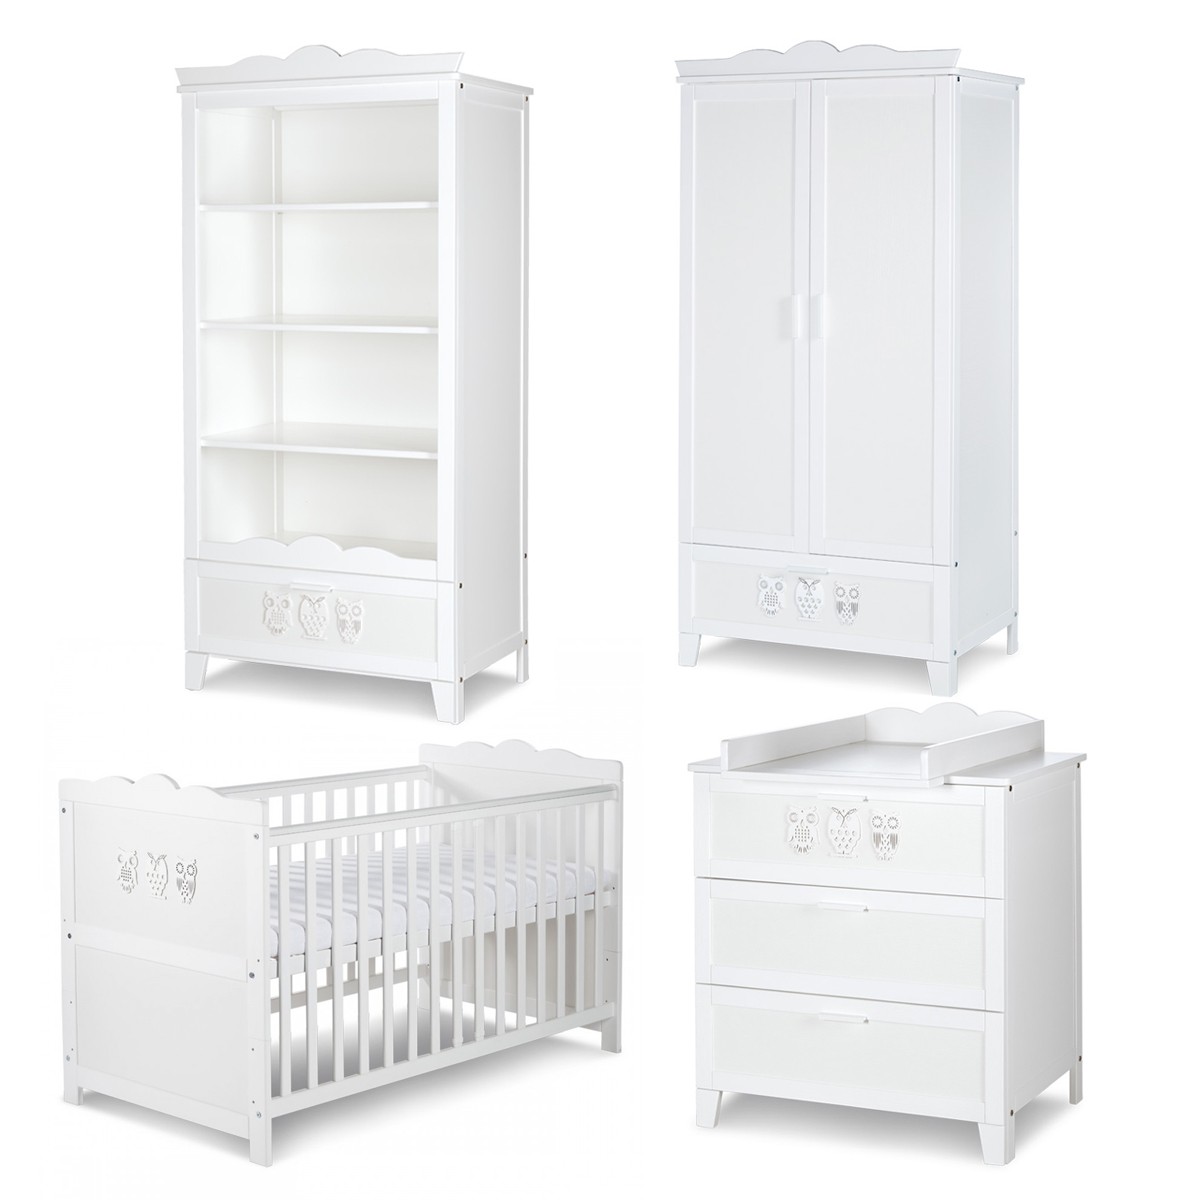 Marsell Chambre Bebe Complete Lit Evolutif 140x70 Commode A Langer Armoire Bibliotheque